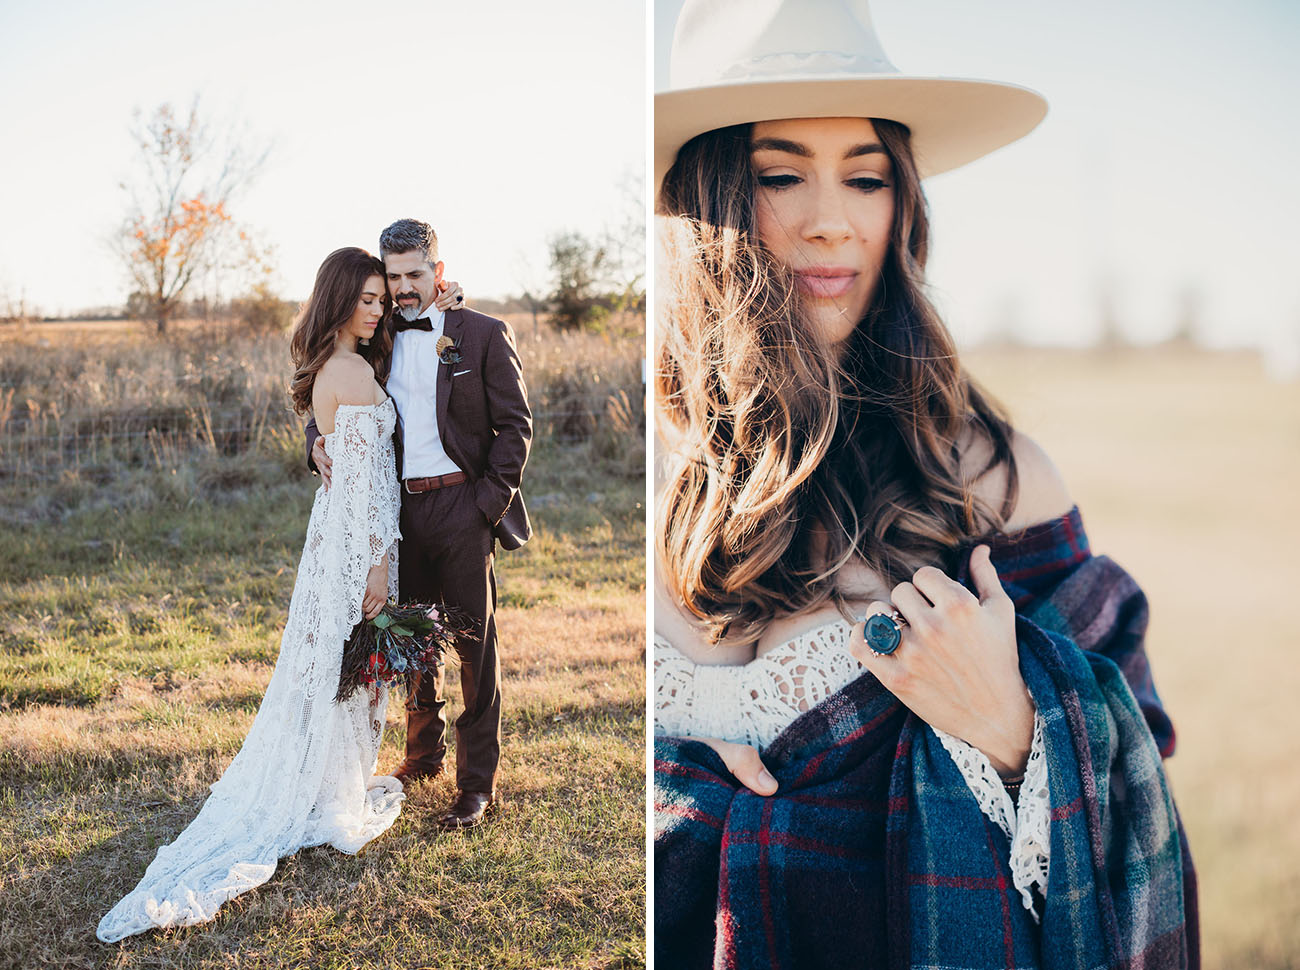 The bride covered up with a plaid shawl that reminded of iconic Ralph Lauren style